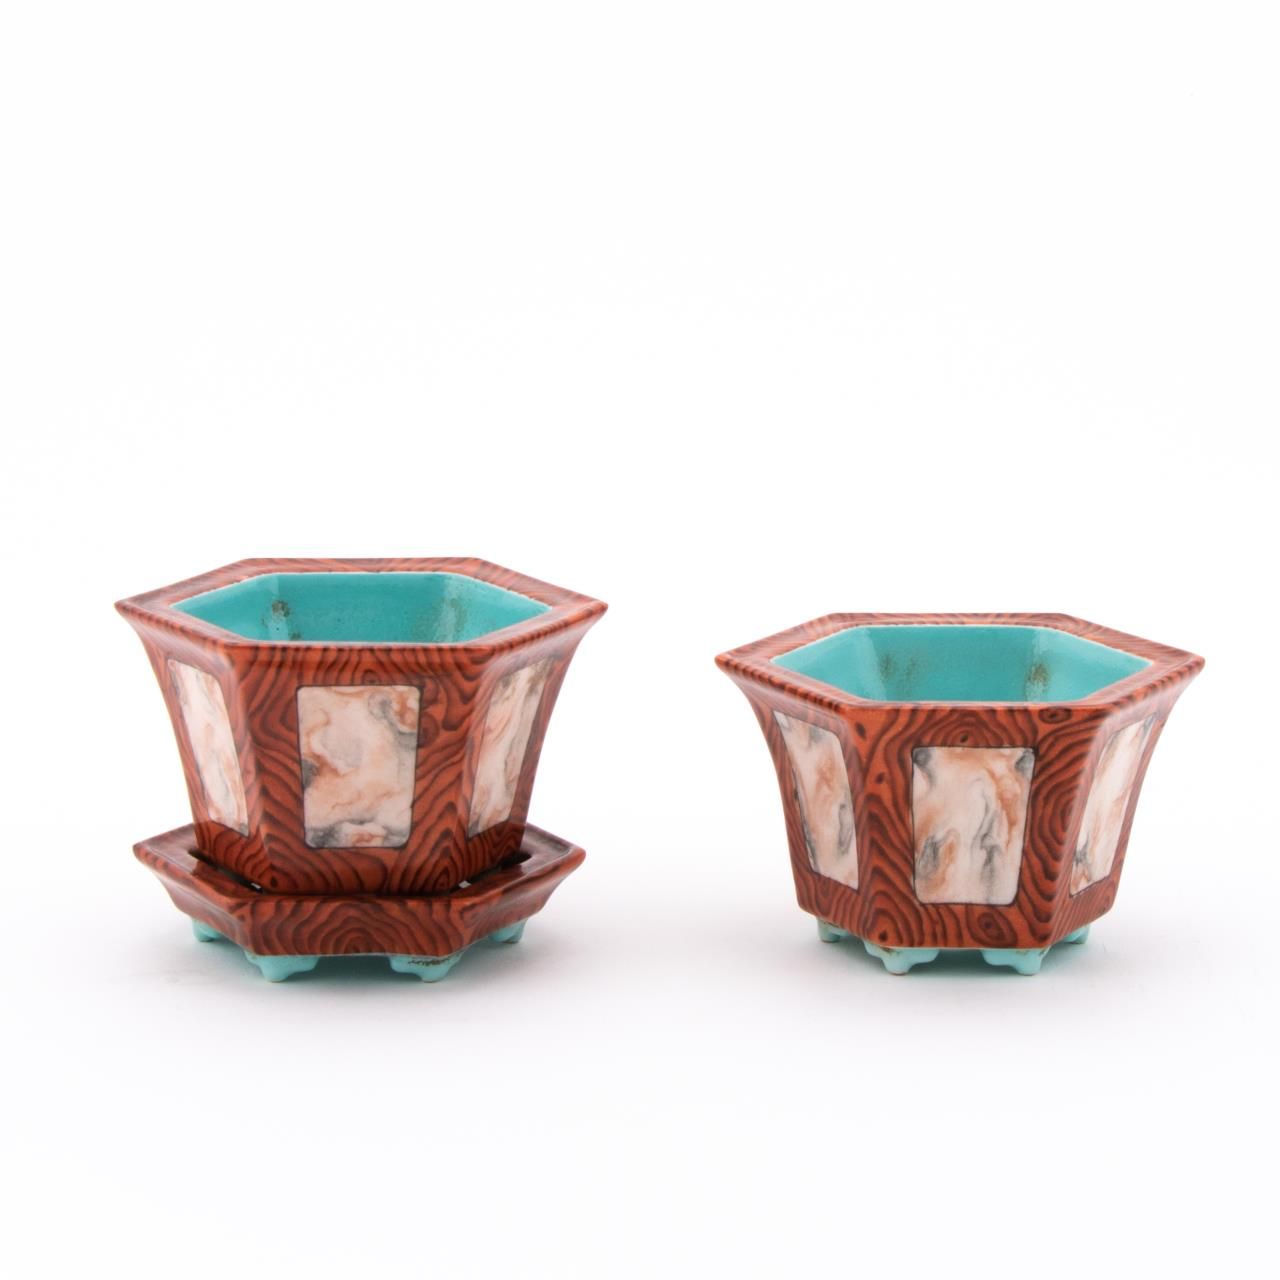 PAIR, CHINESE SMALL PLANTERS, SINGLE